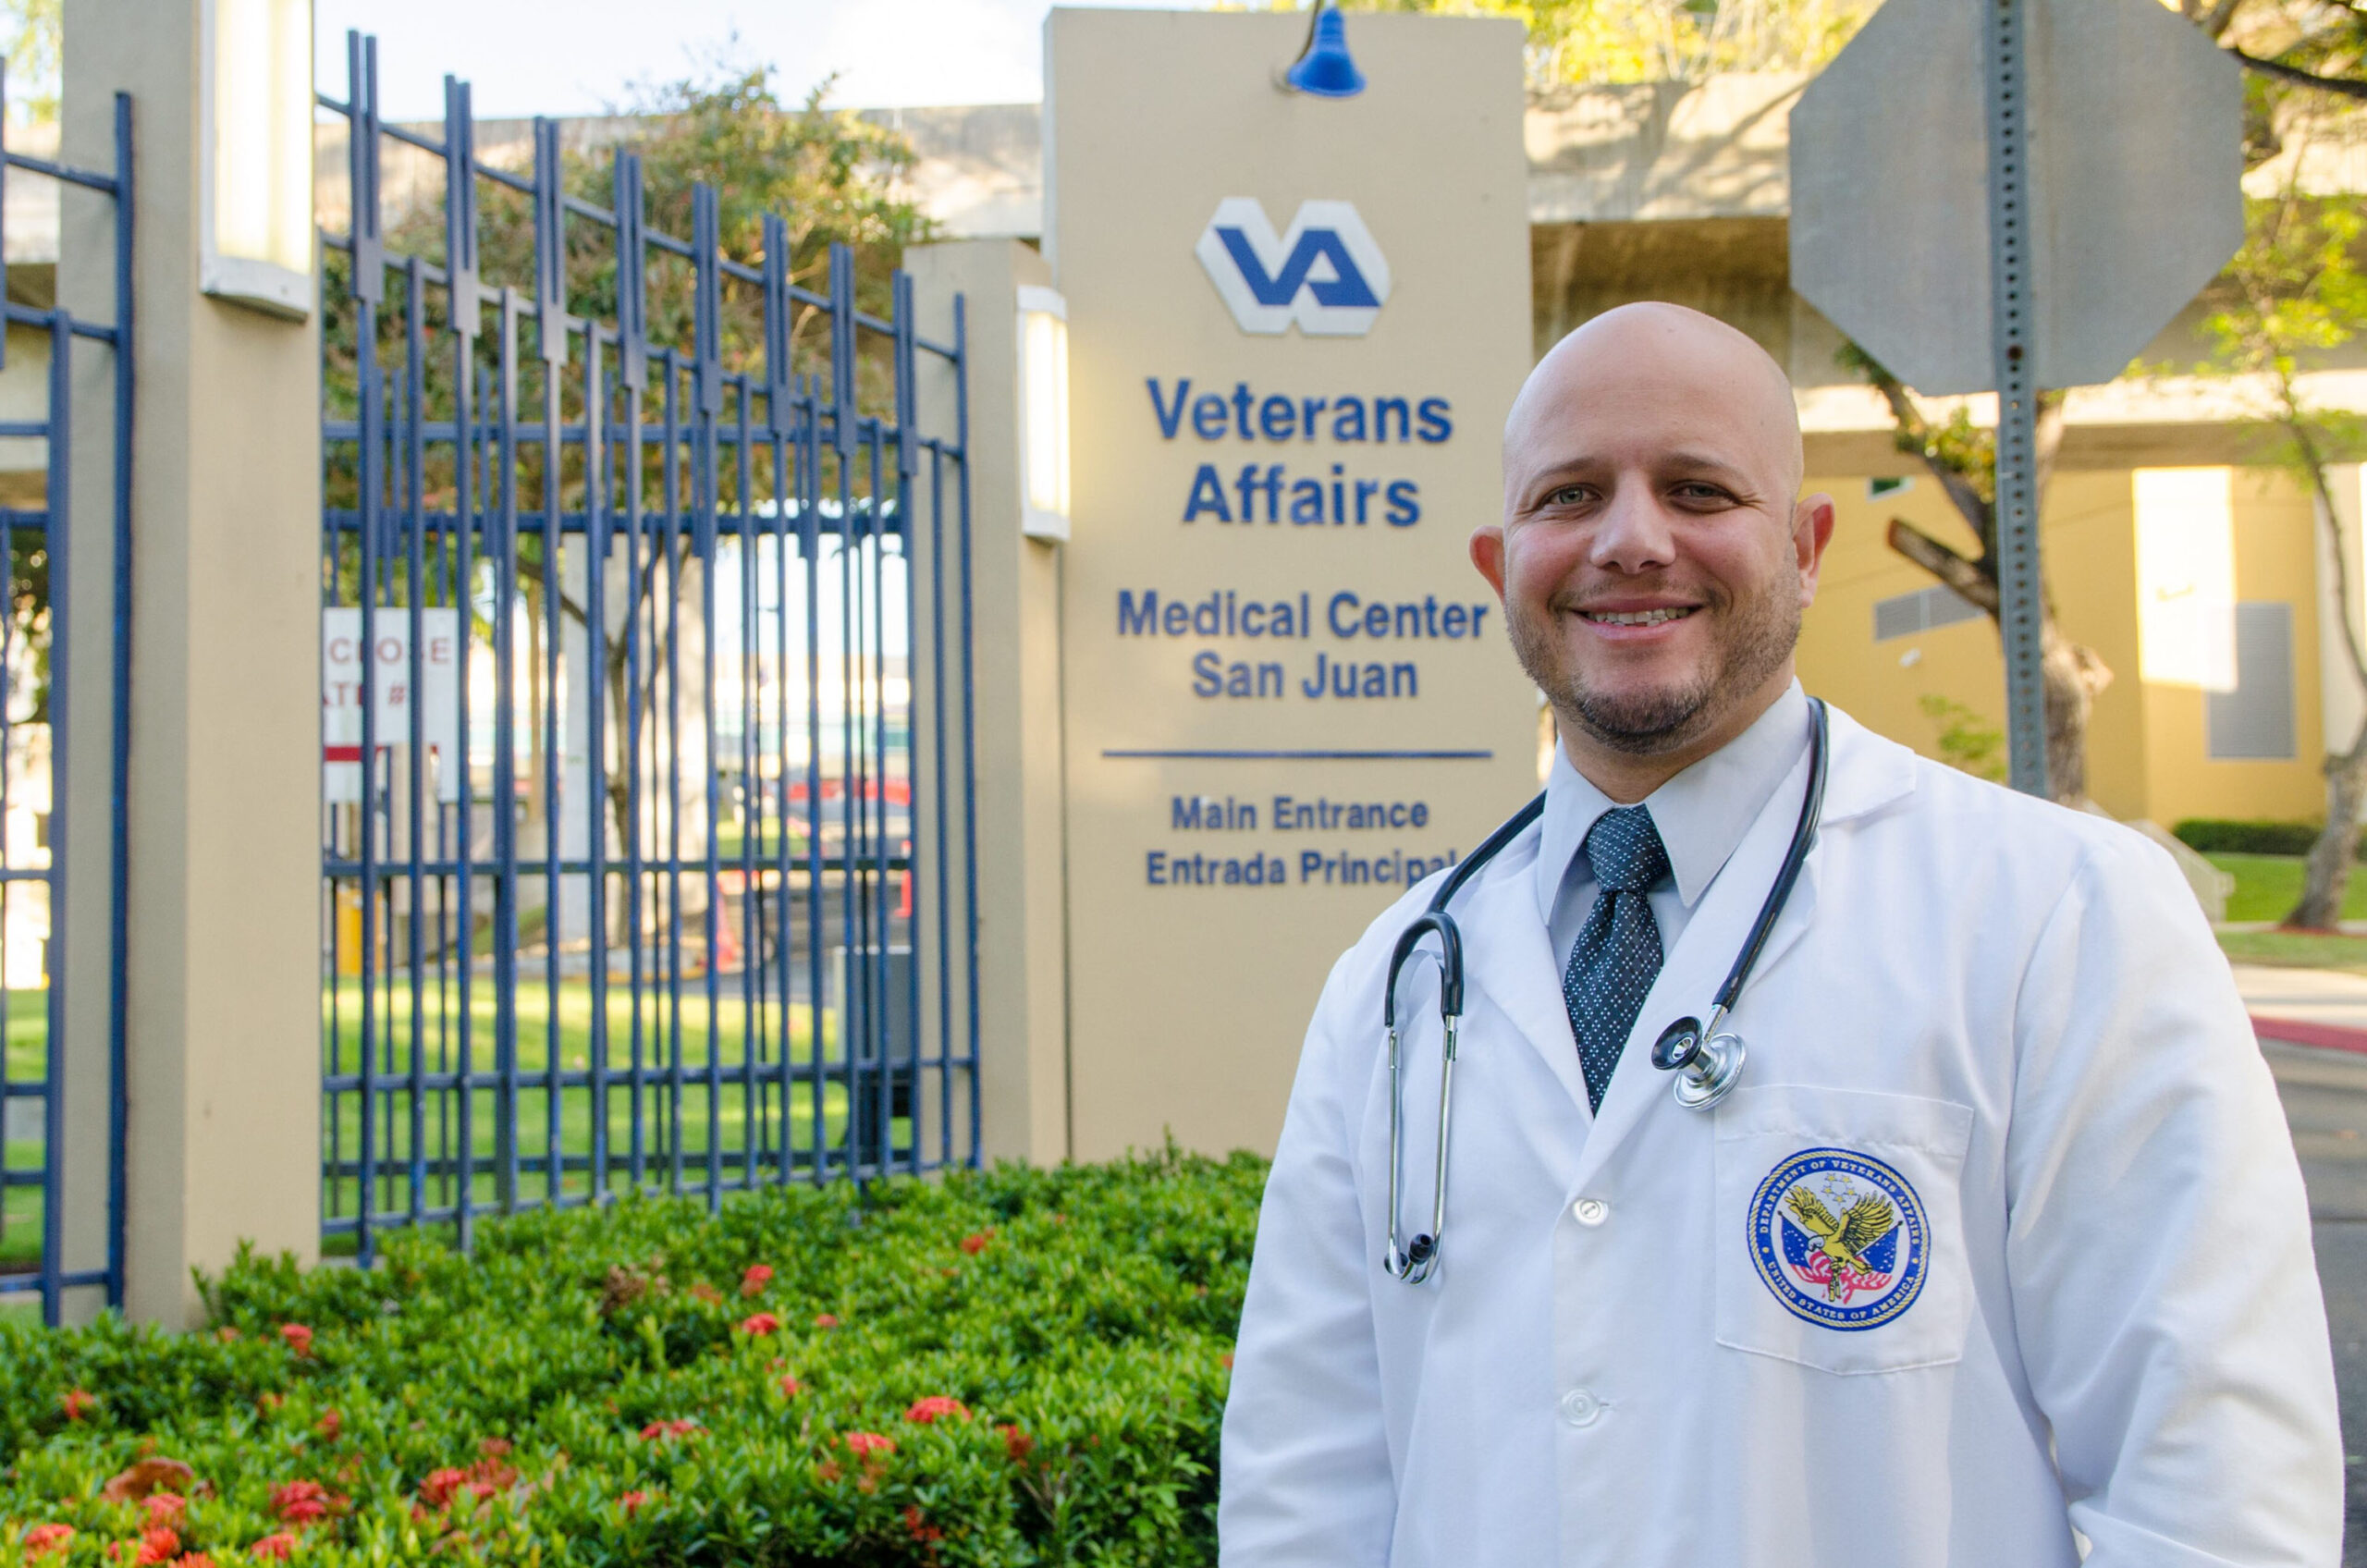 PA Josue Droz in front of the Veterans Affairs Medical Center in San Juan, Puerto Rico